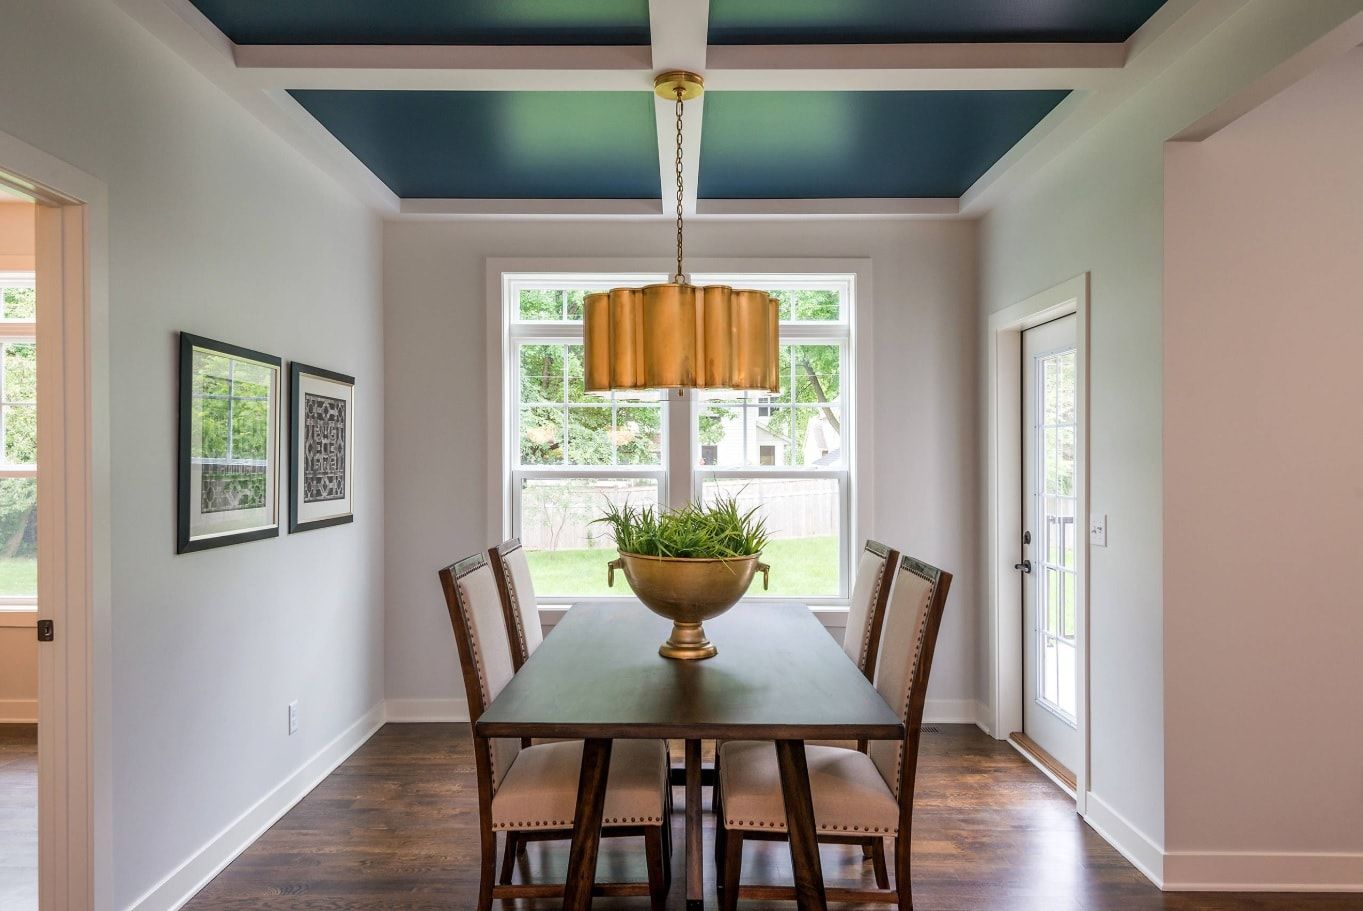 Combined blue stretched and open beamed ceiling as accent in restrained design of the dining room